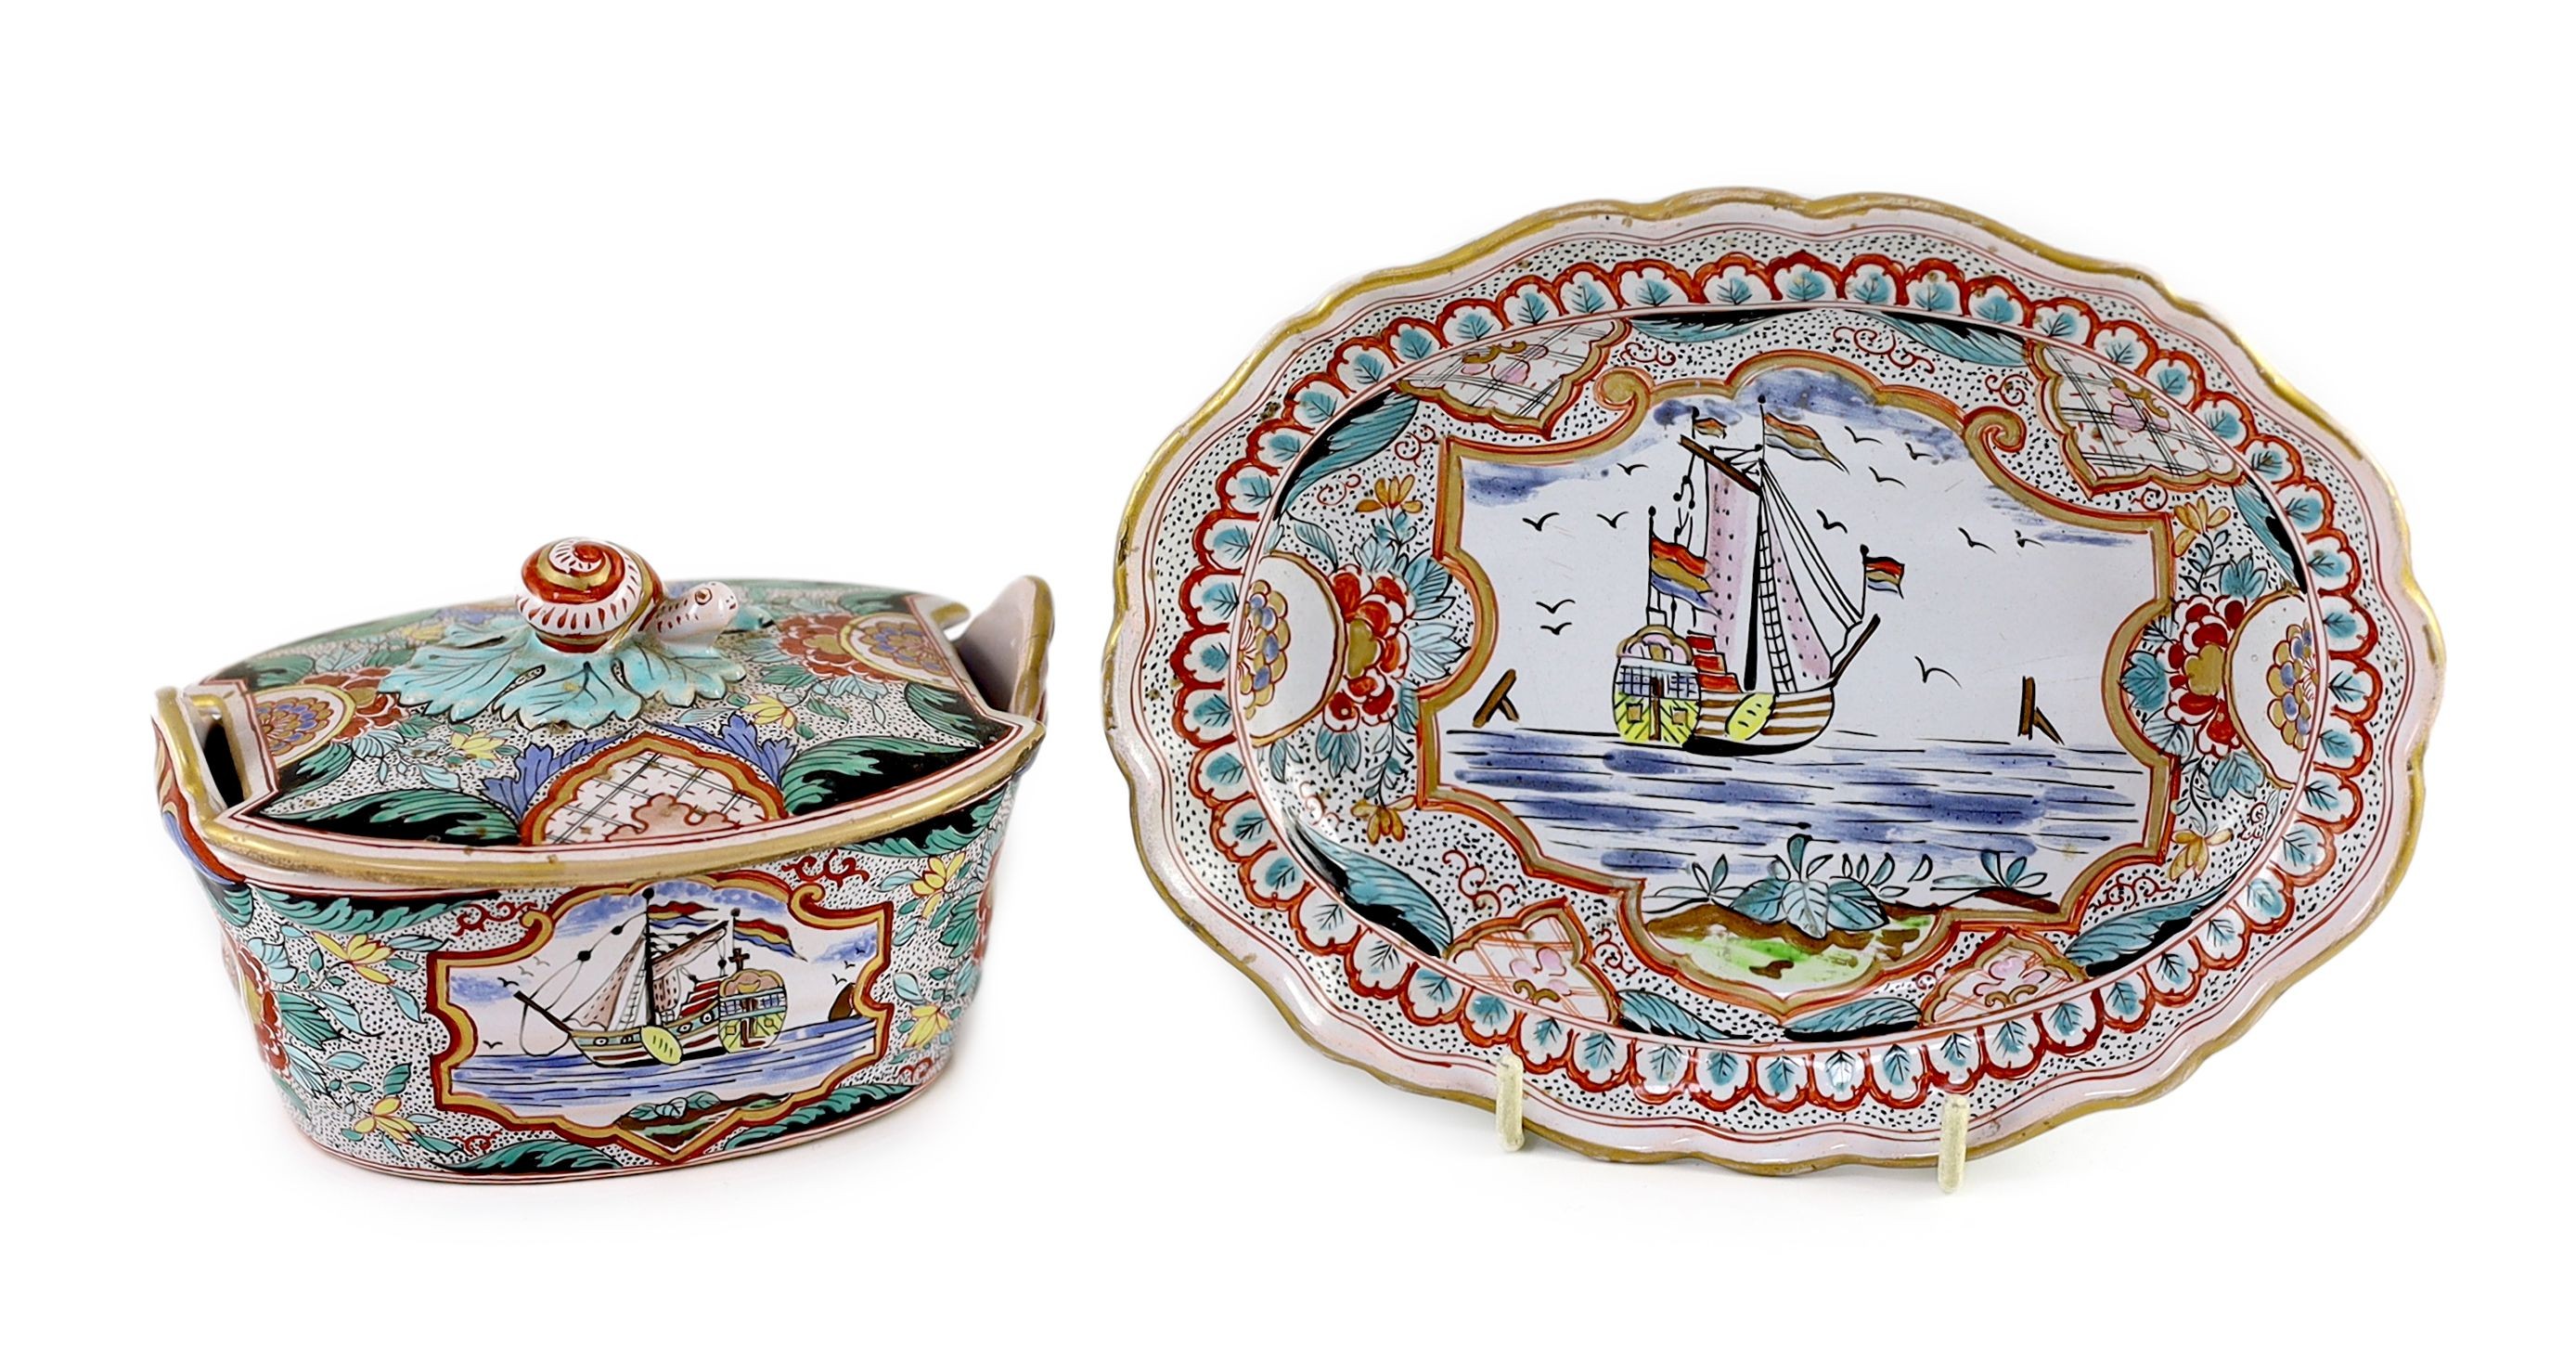 A Delft butter tub, cover and stand, Hendrik van Hoorn manufactory, second half 18th century, 18cm wide, crack to tub